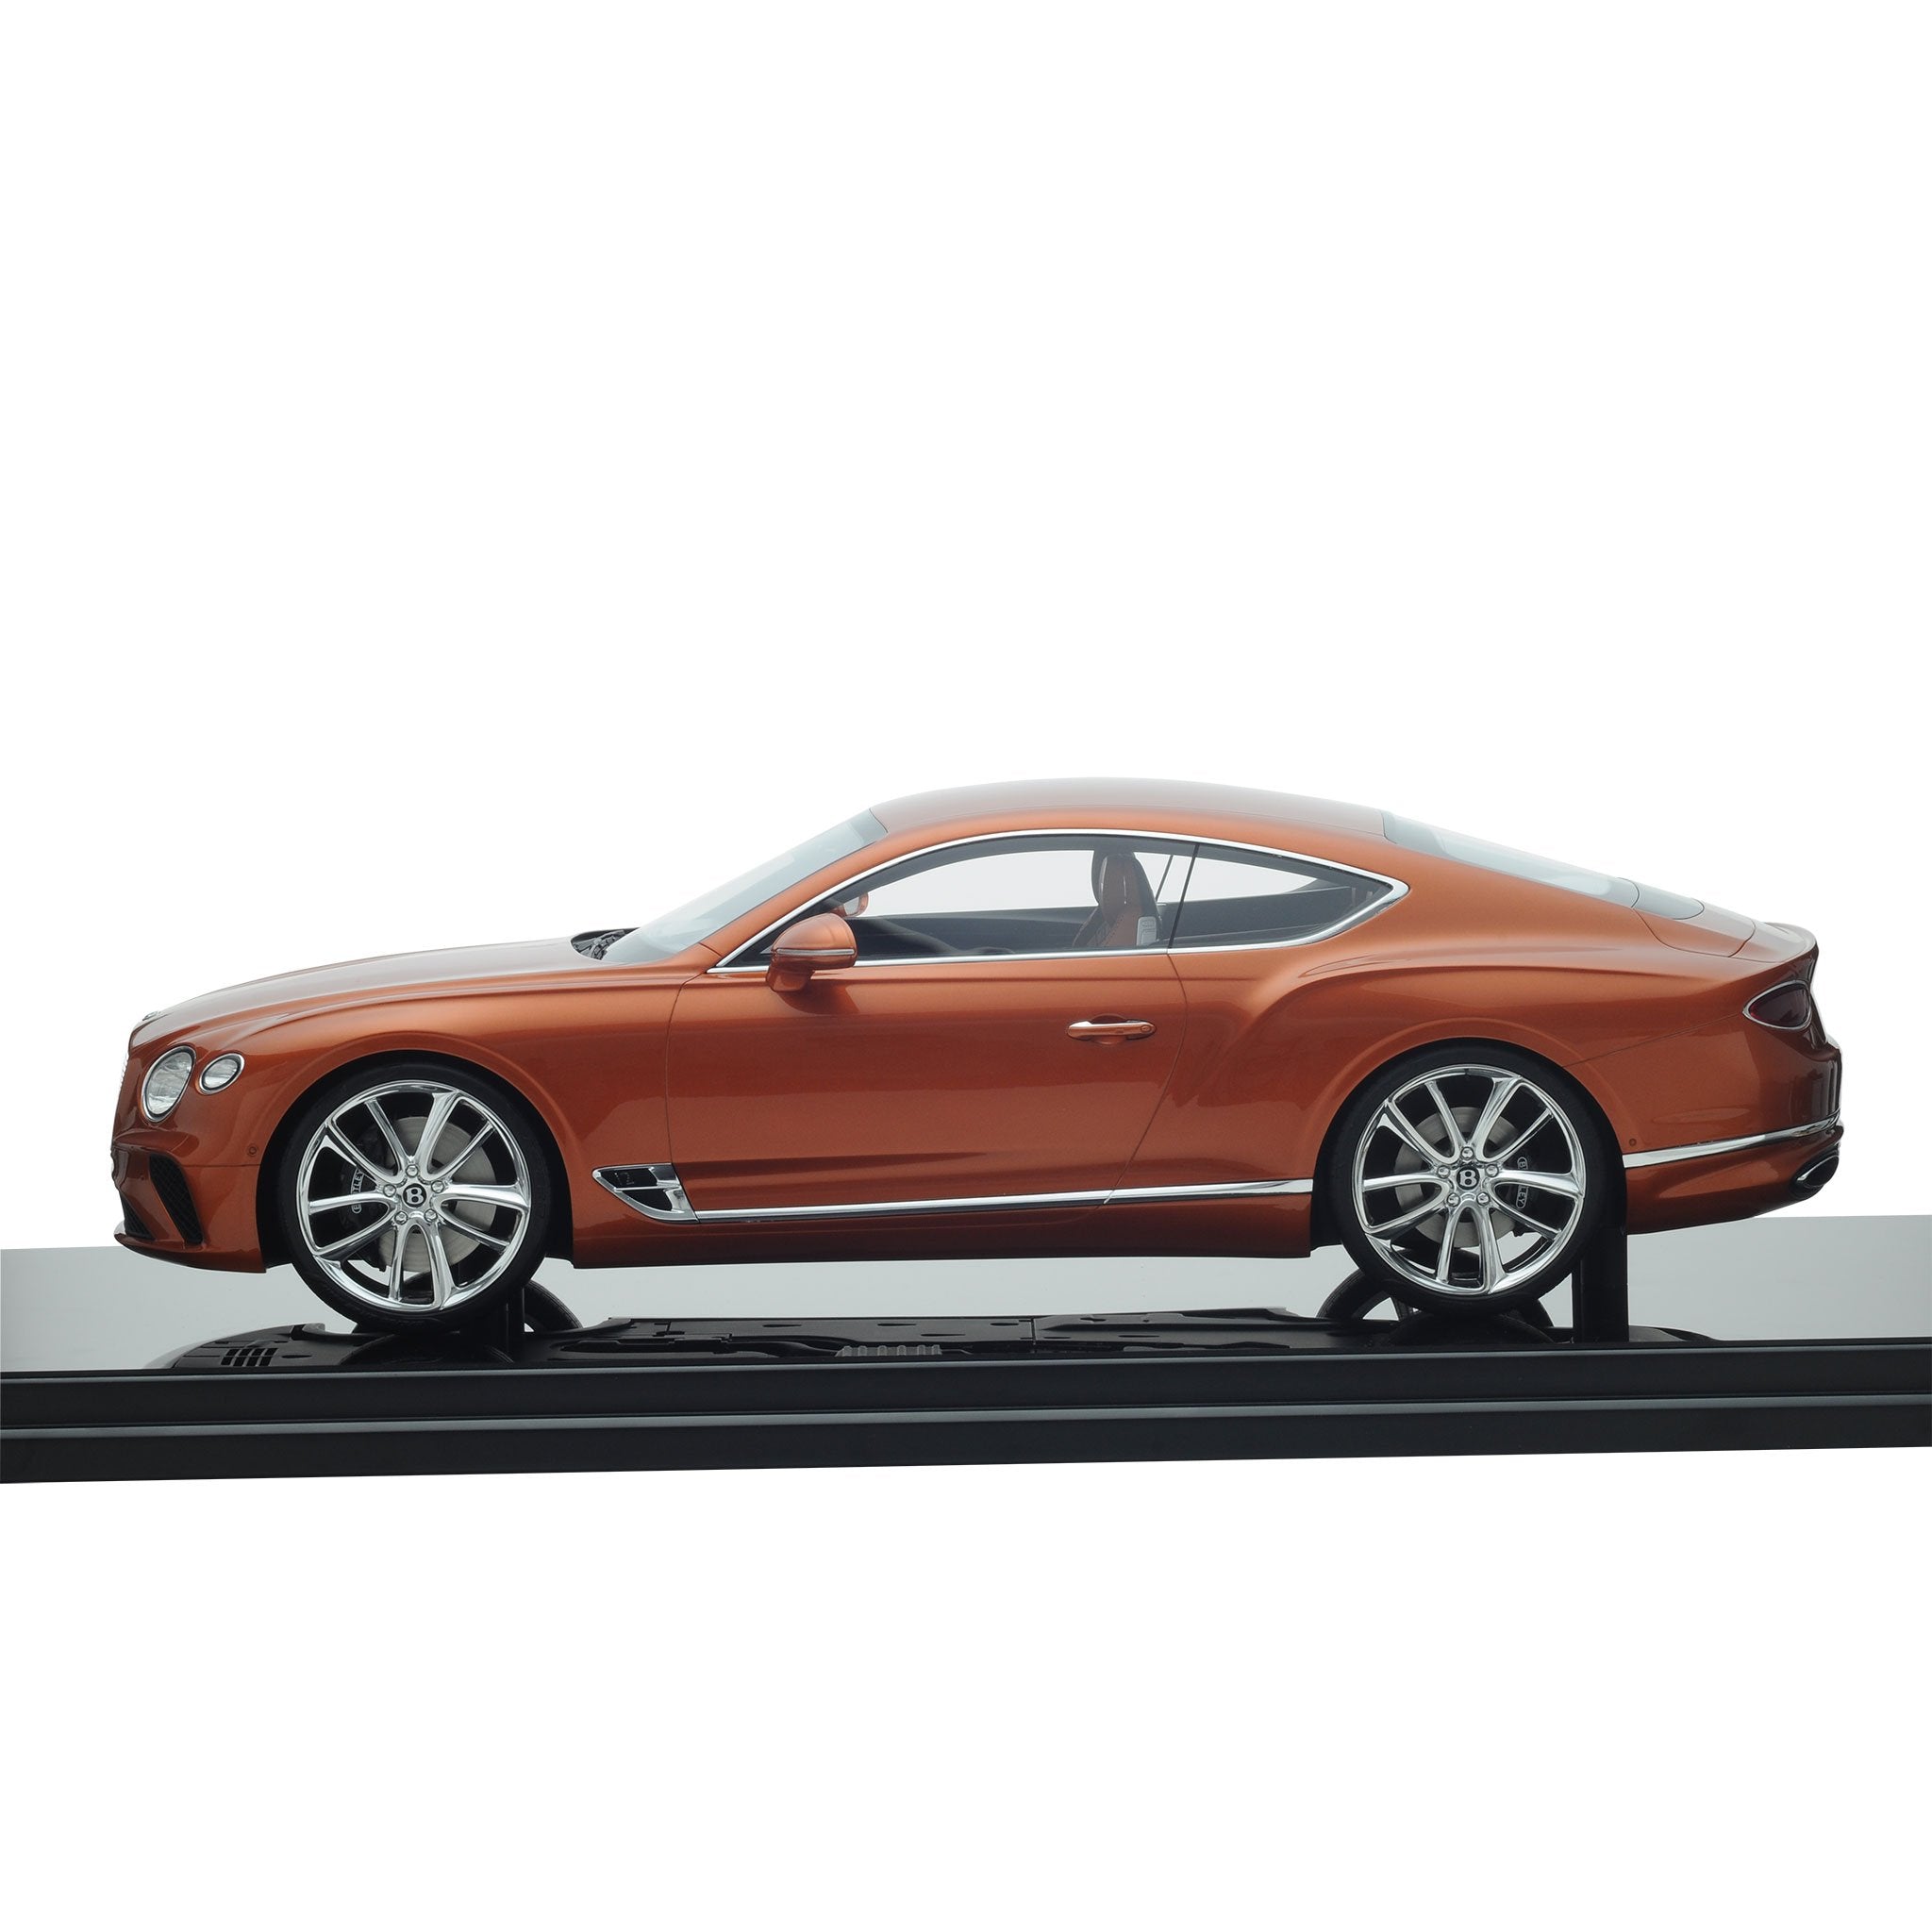 1:8 Continental GT Bespoke Model – The 